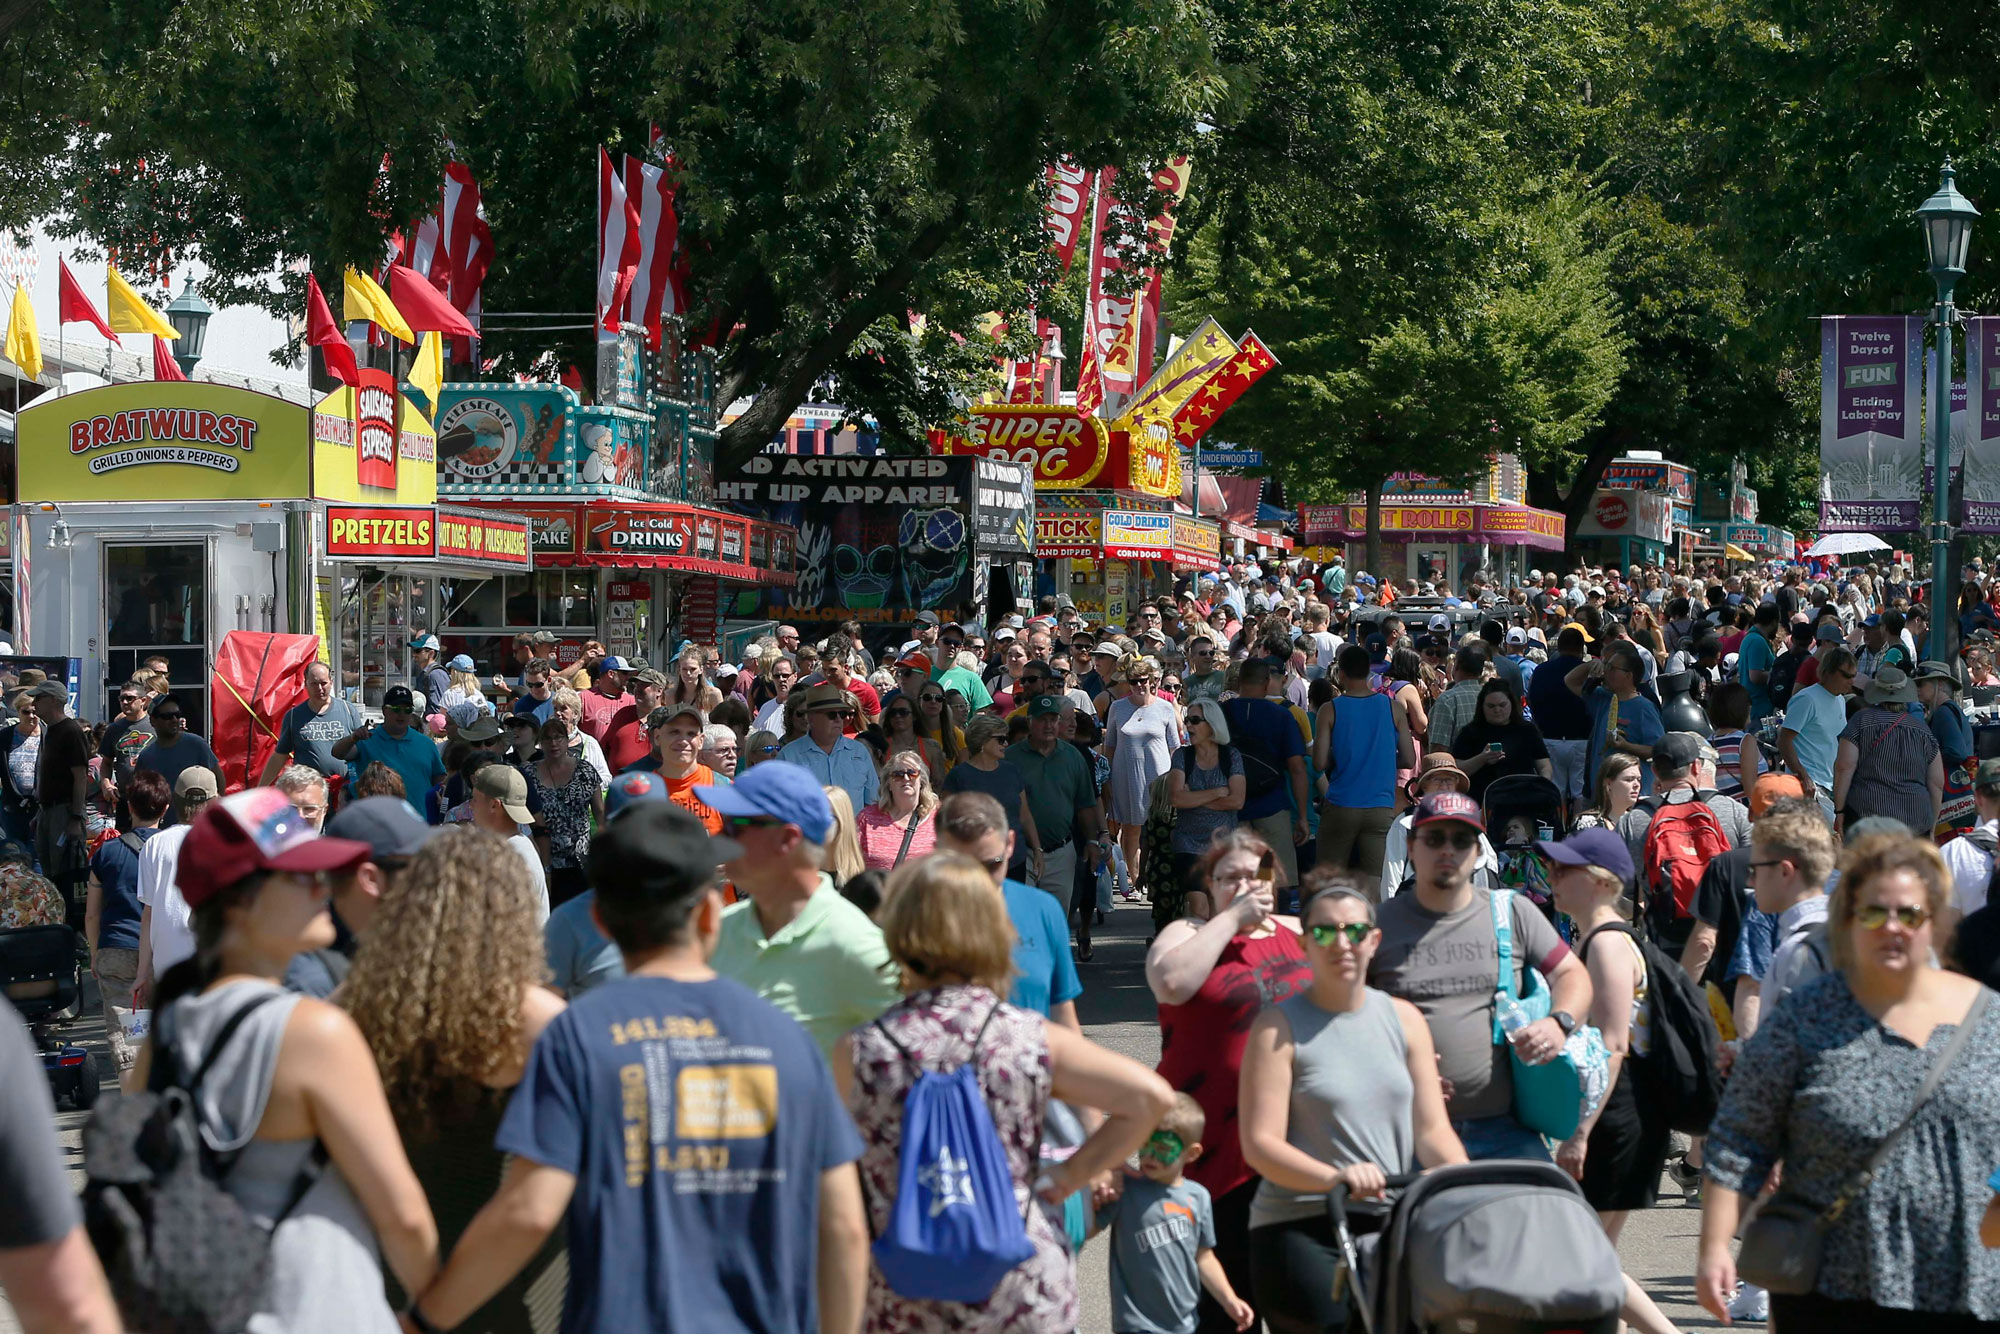 Thousands packed the fairgrounds as the 12-day Minnesota State Fair gets underway on Aug. 22, 2019, in Falcon Heights, Minnesota.